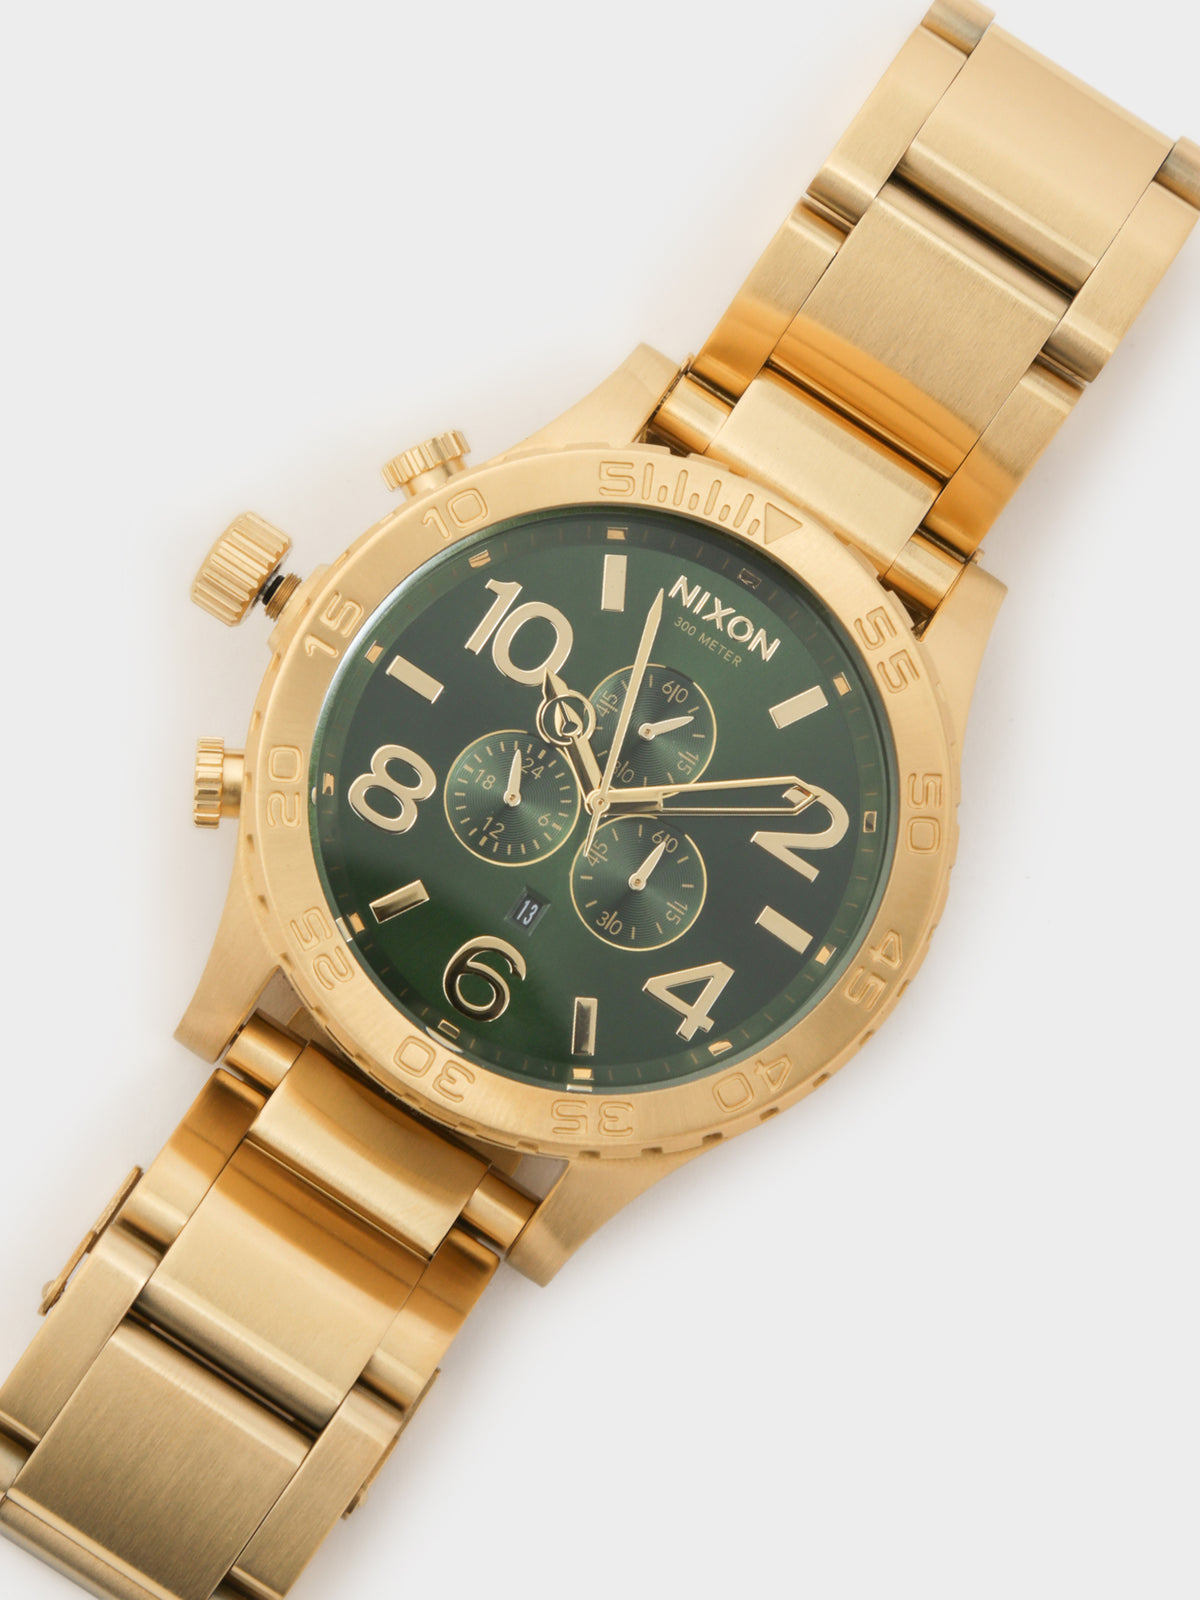 51-30 Chrono Watch in Gold &amp; Green